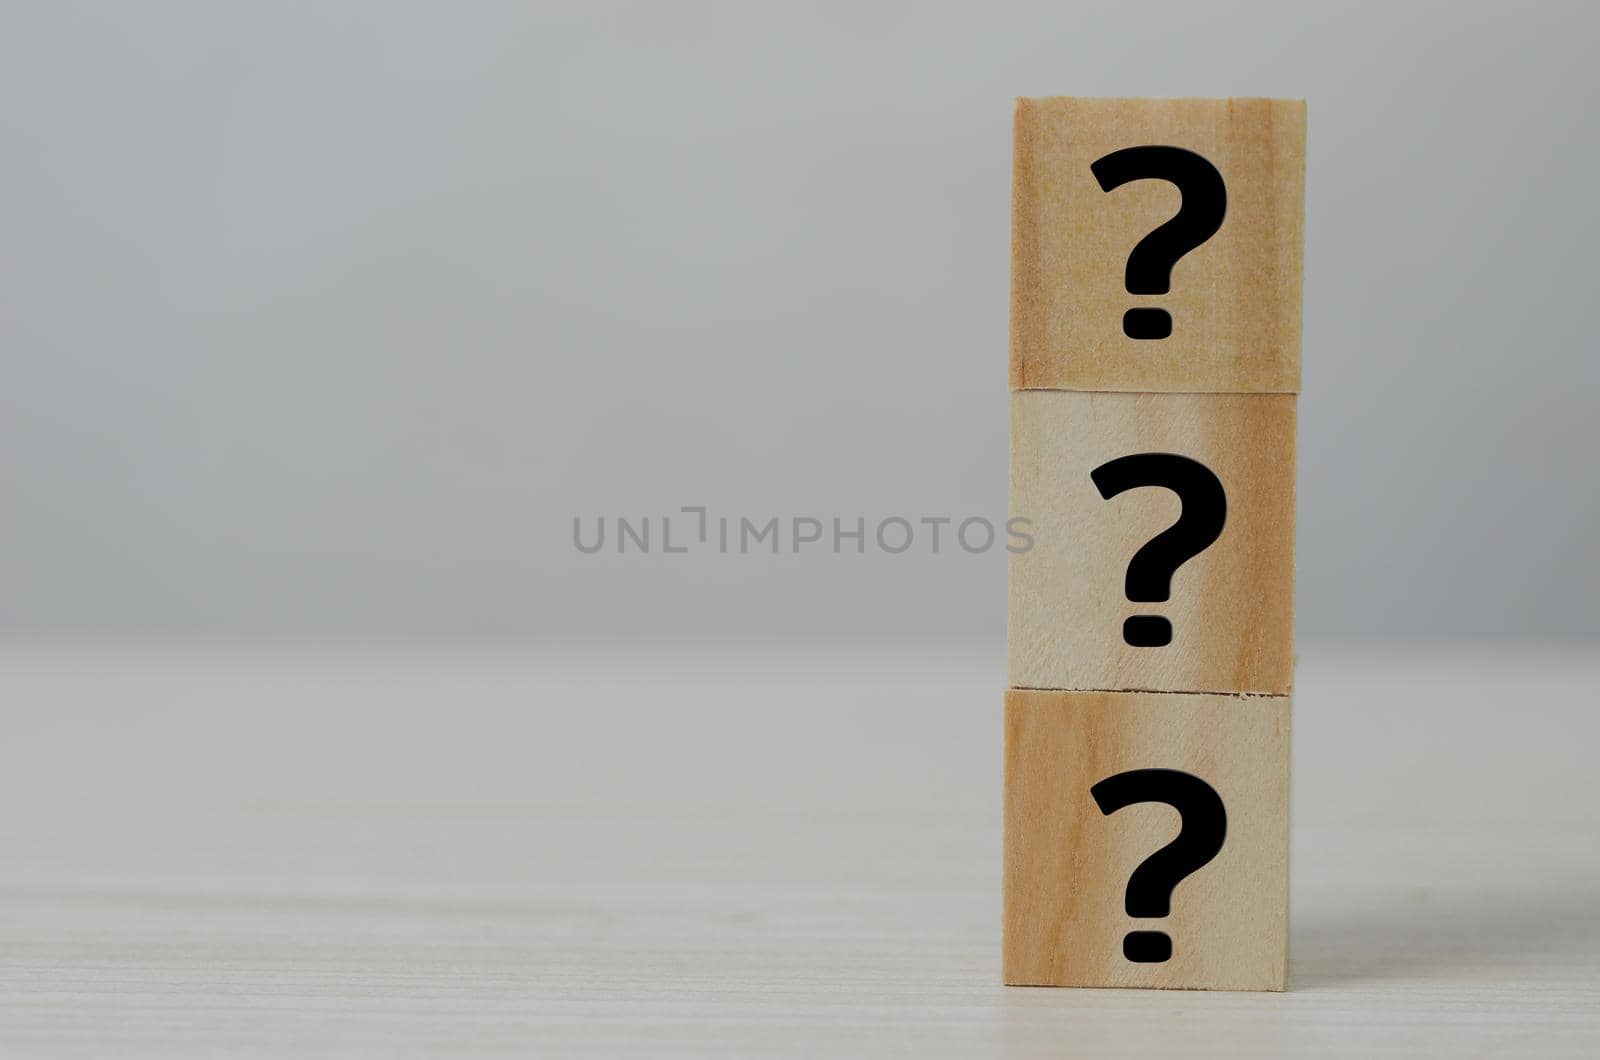 Square wooden block icon question mark symbol copy space. by aoo3771